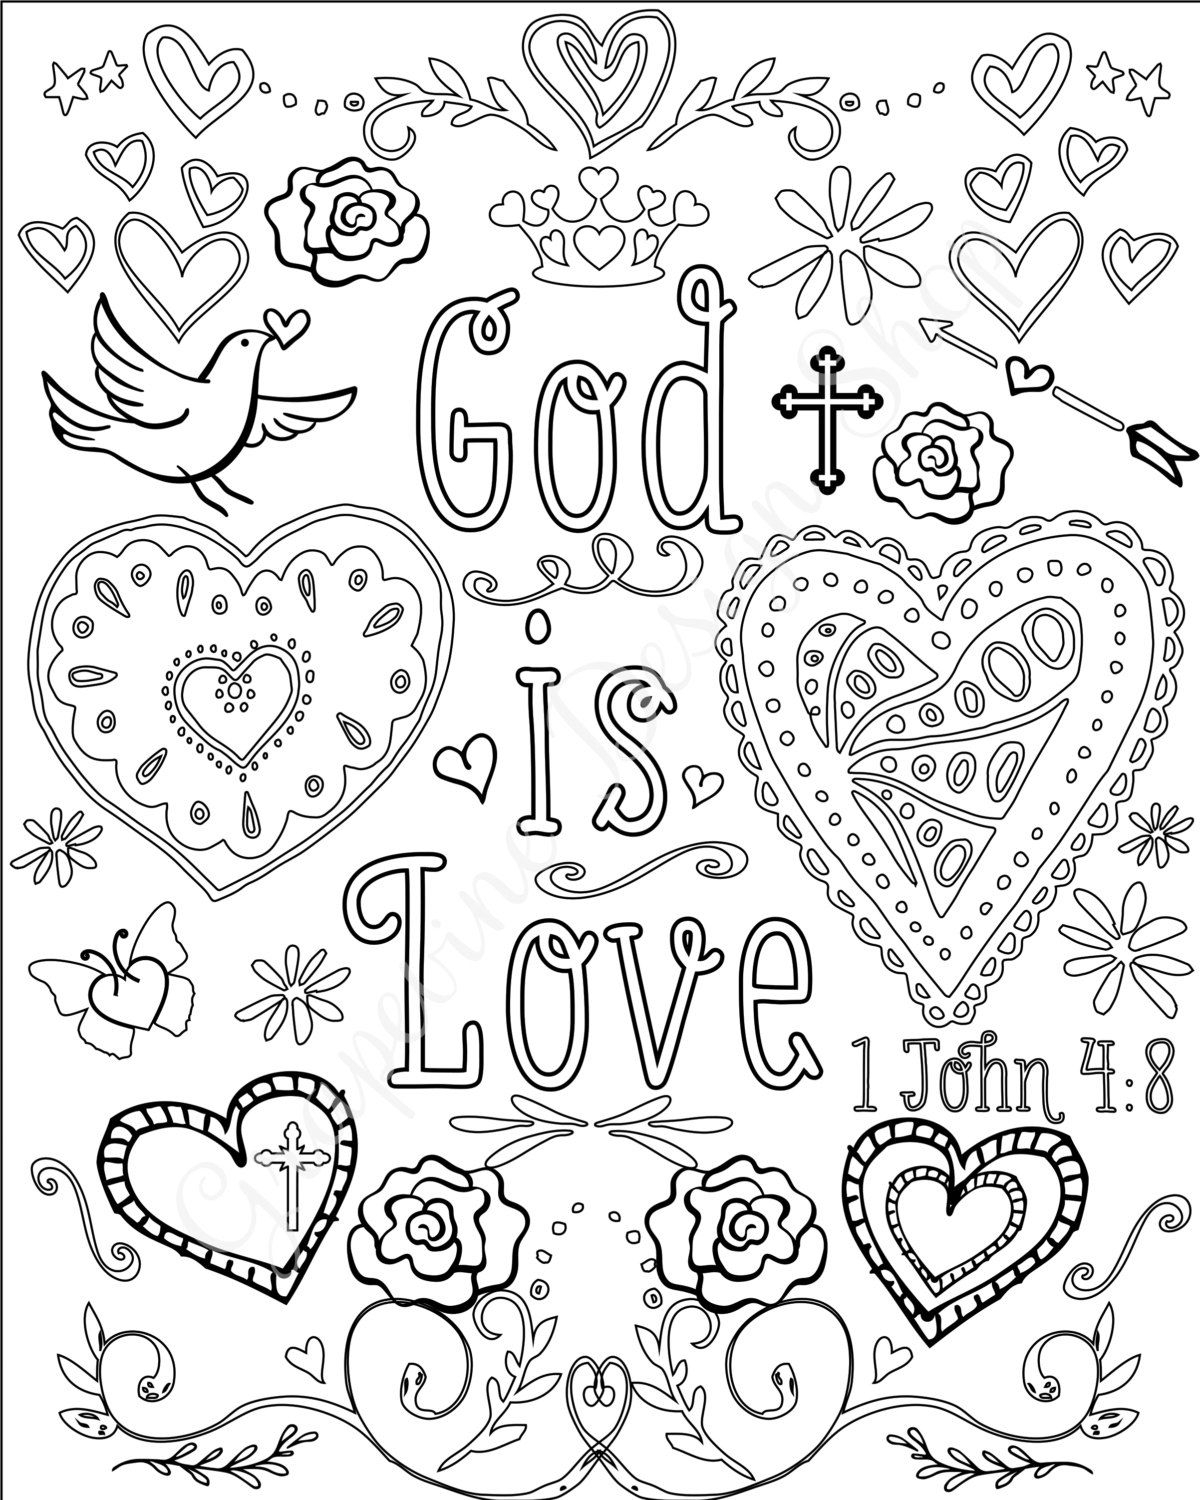 Bible Verse Coloring Pages For Kids at Free